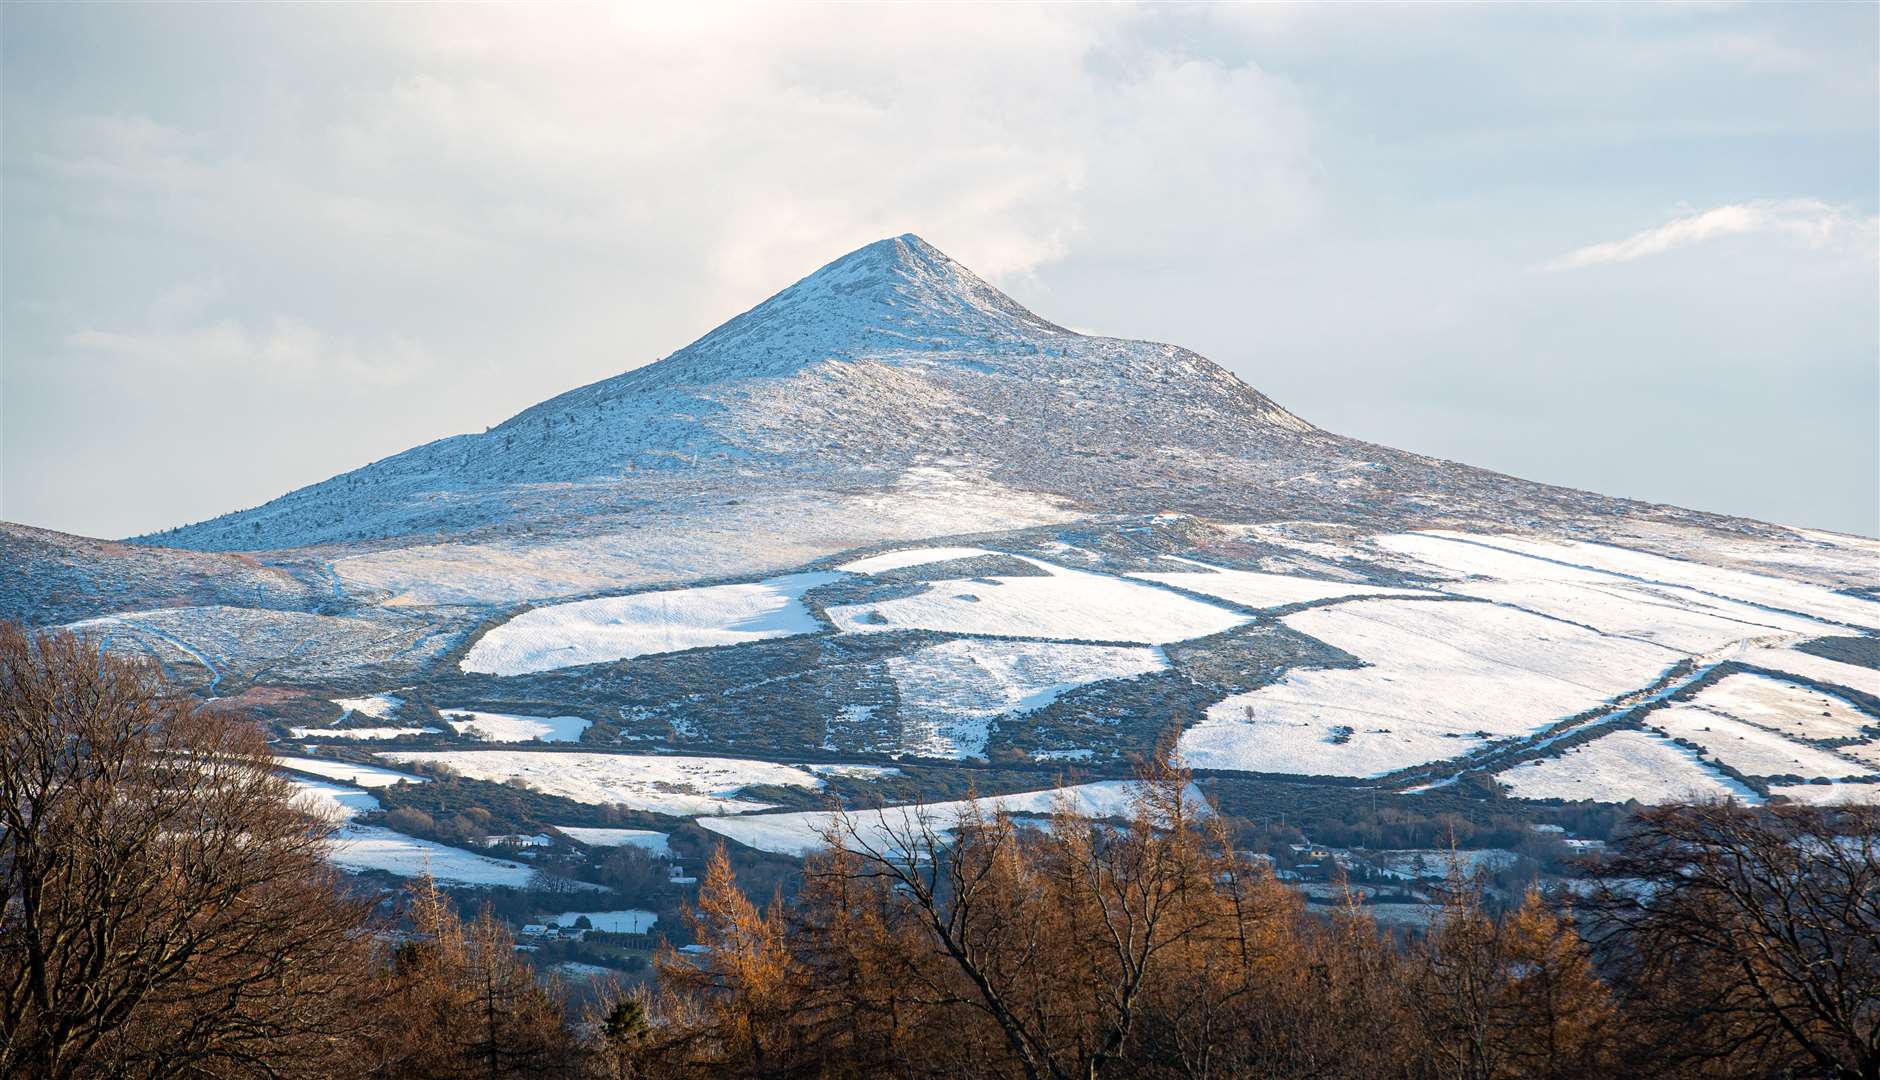 A view of Sugarloaf mountain in Wicklow covered in snow as Ireland is hit by cold weather (Damien Storan/PA)